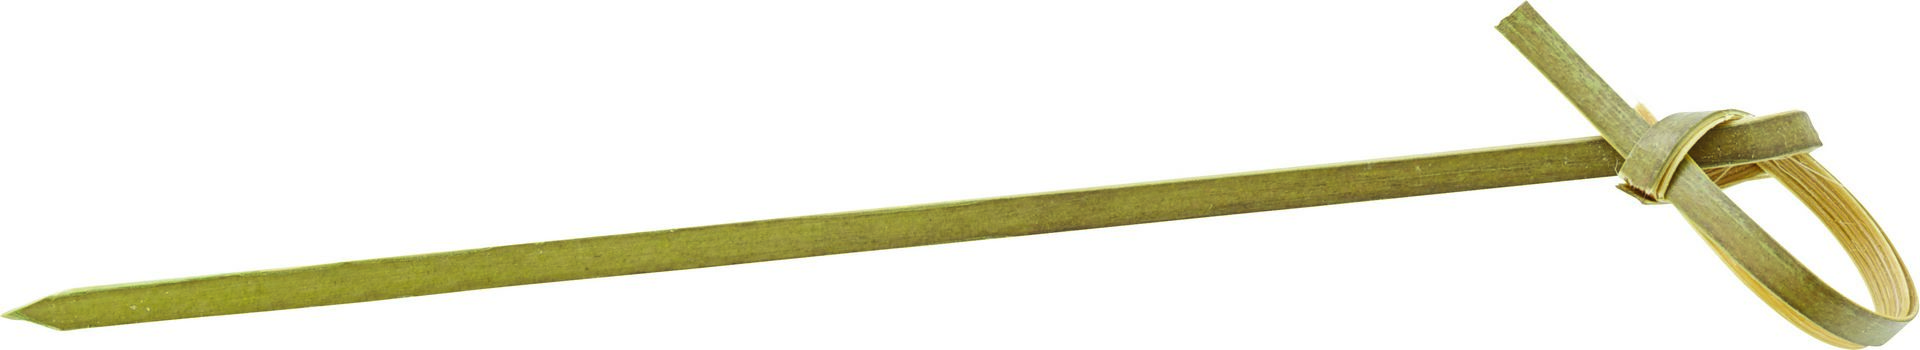 Knot Bamboo Skewer 3.5